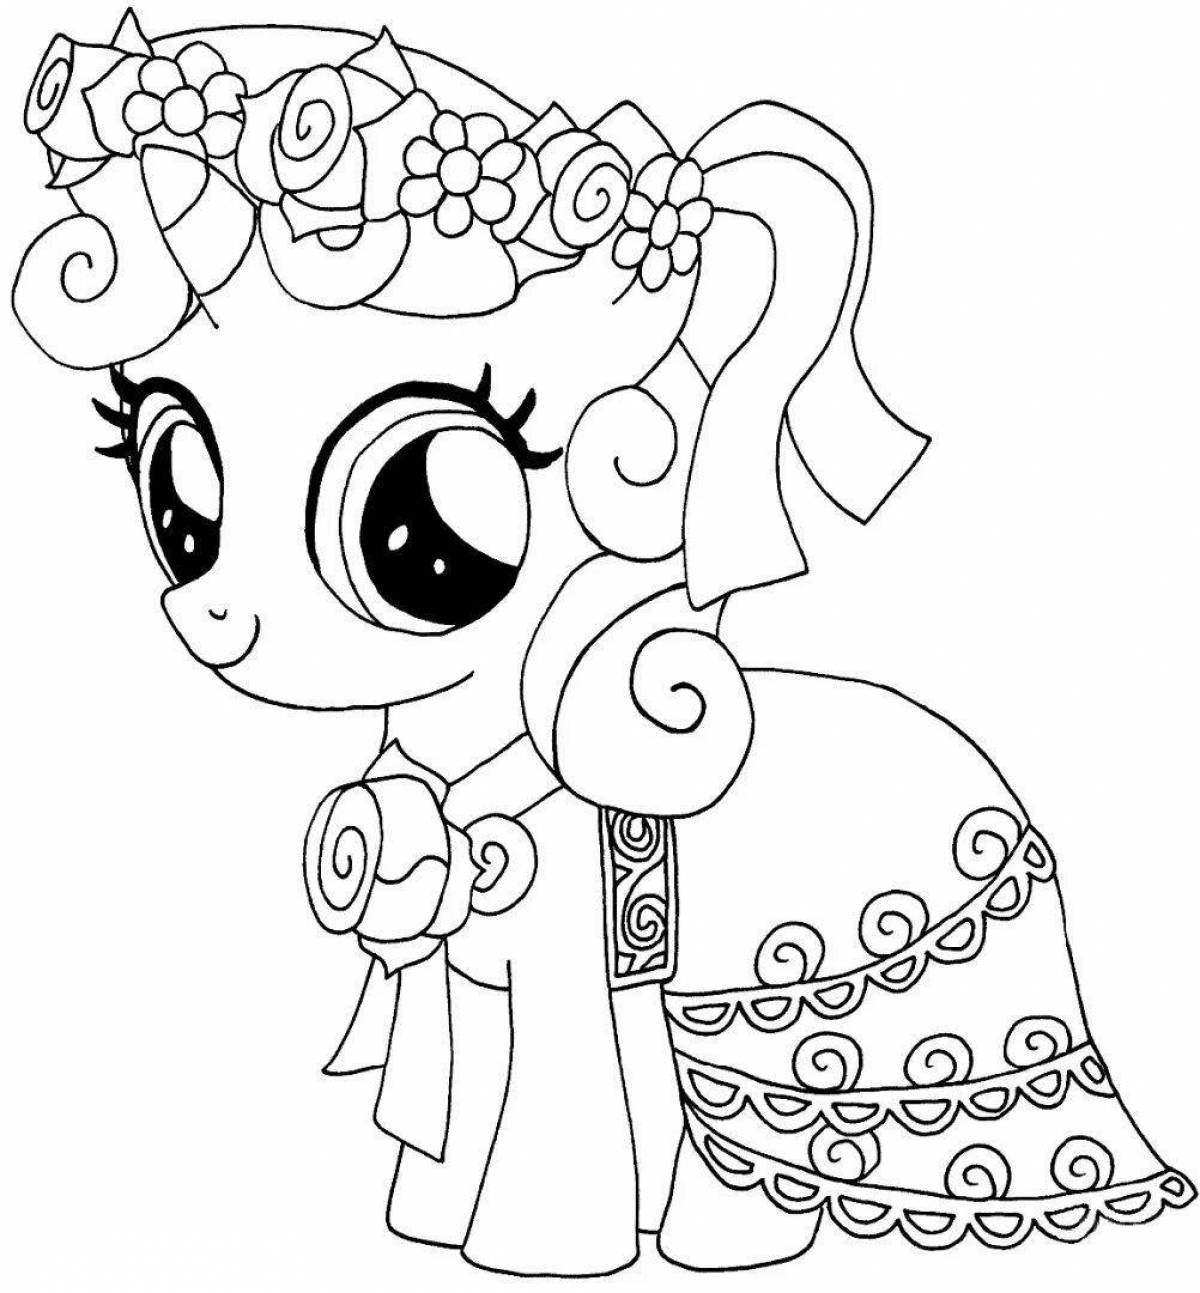 Colorful pony coloring book for children 4-5 years old